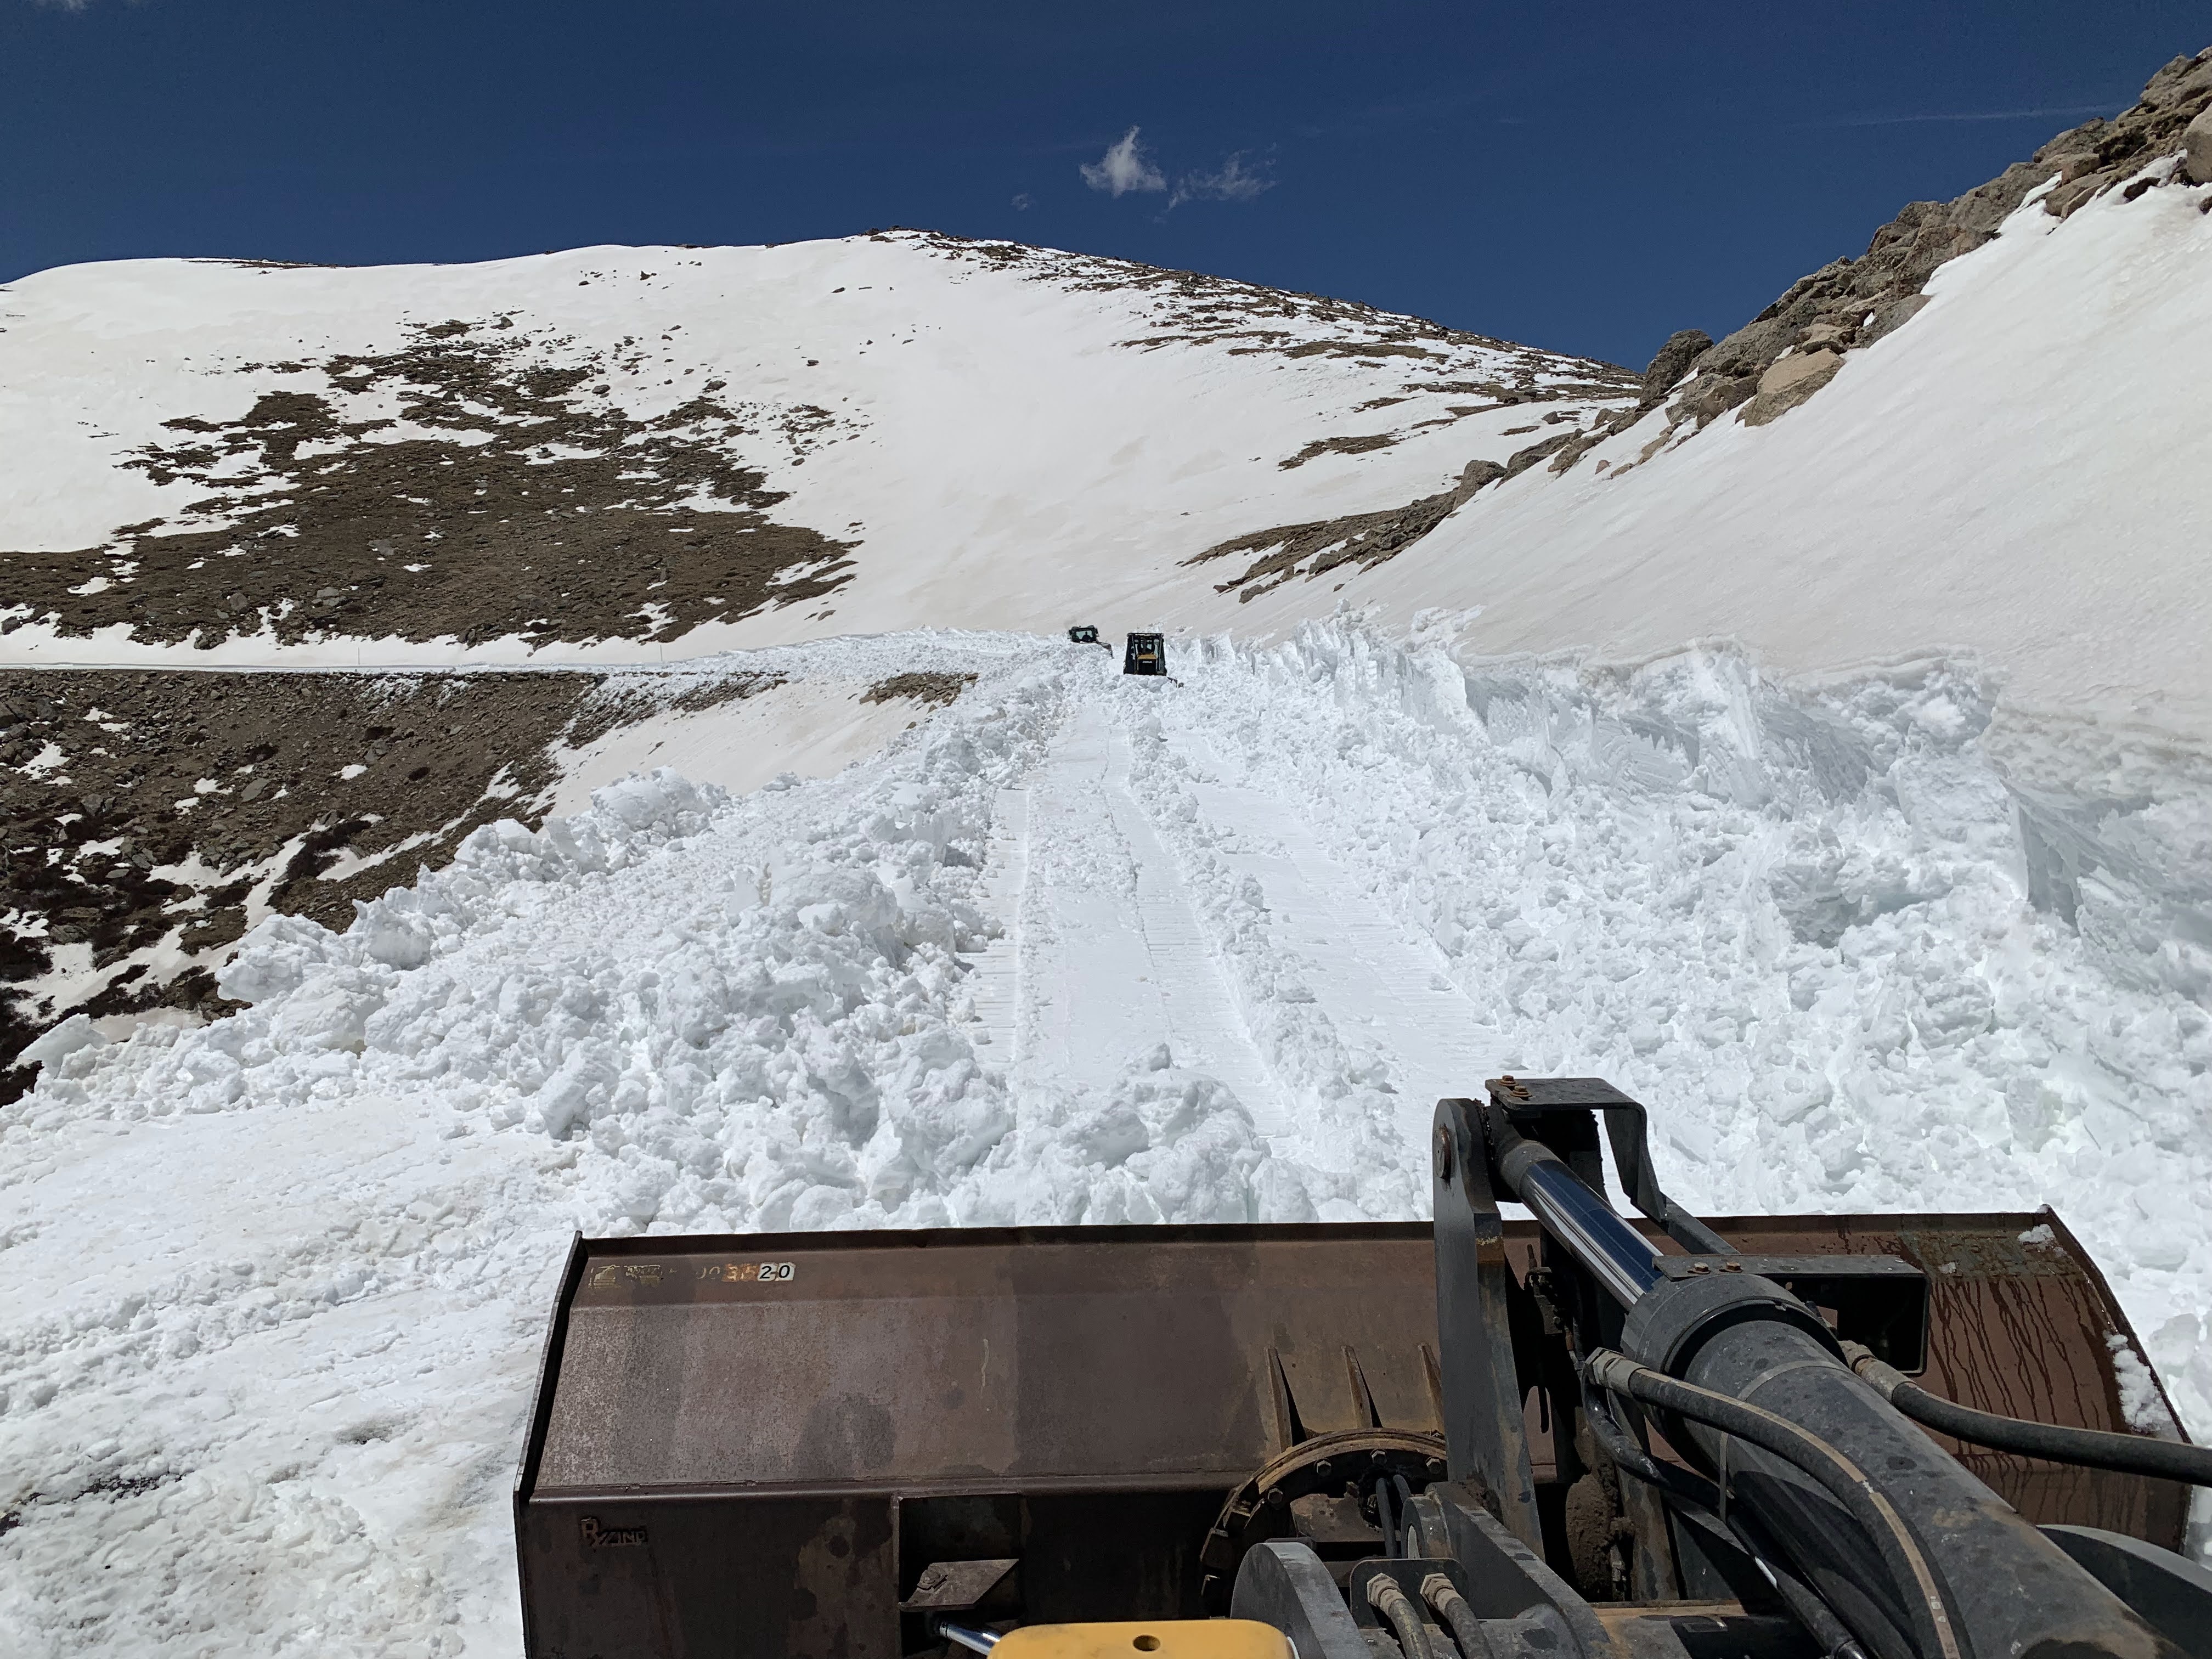 Crews working on tractors to clear Mount Evans Road detail image